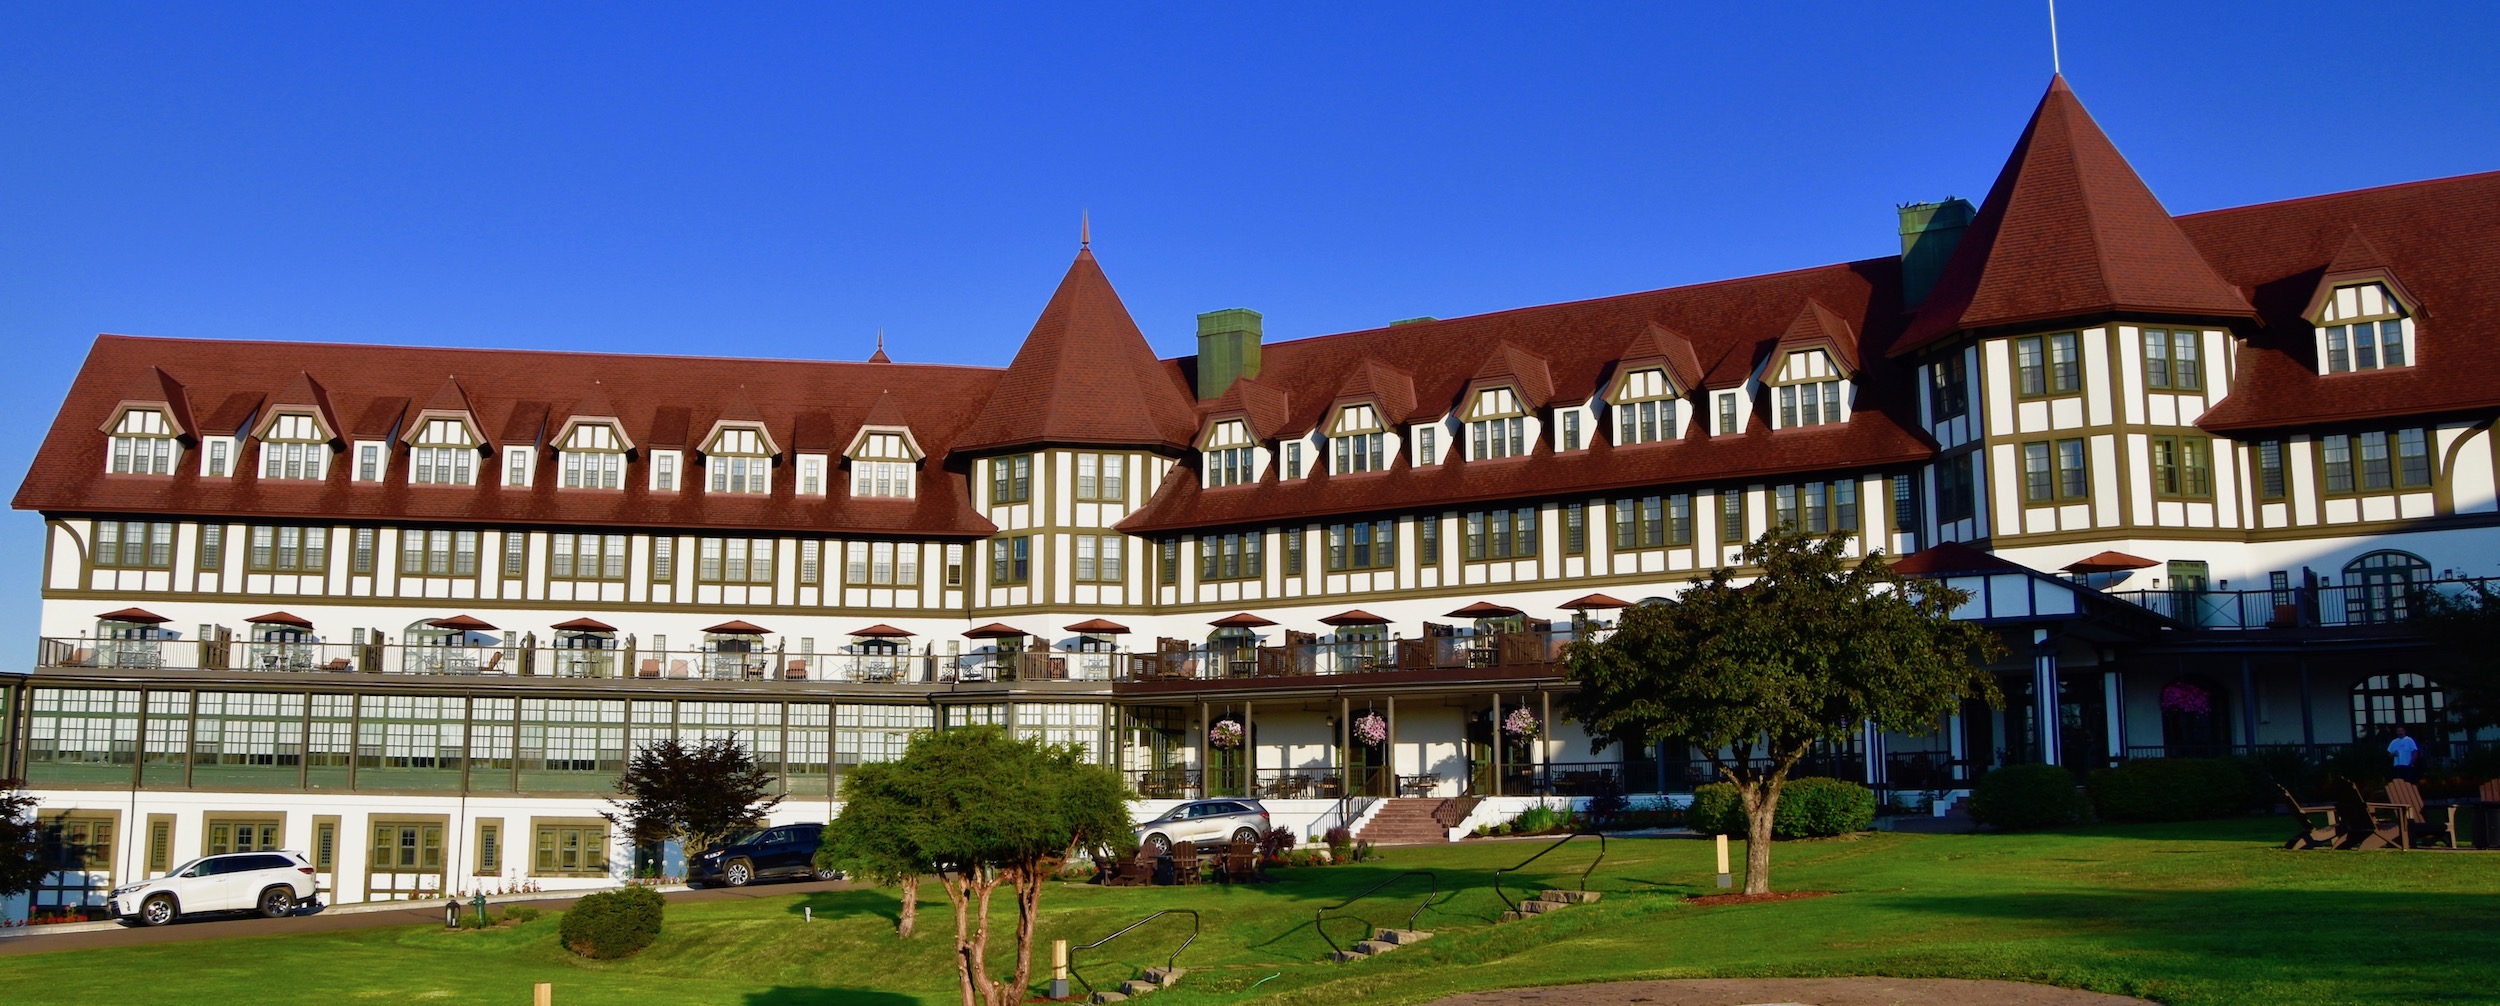 The Algonquin Hotel, St. Andrews